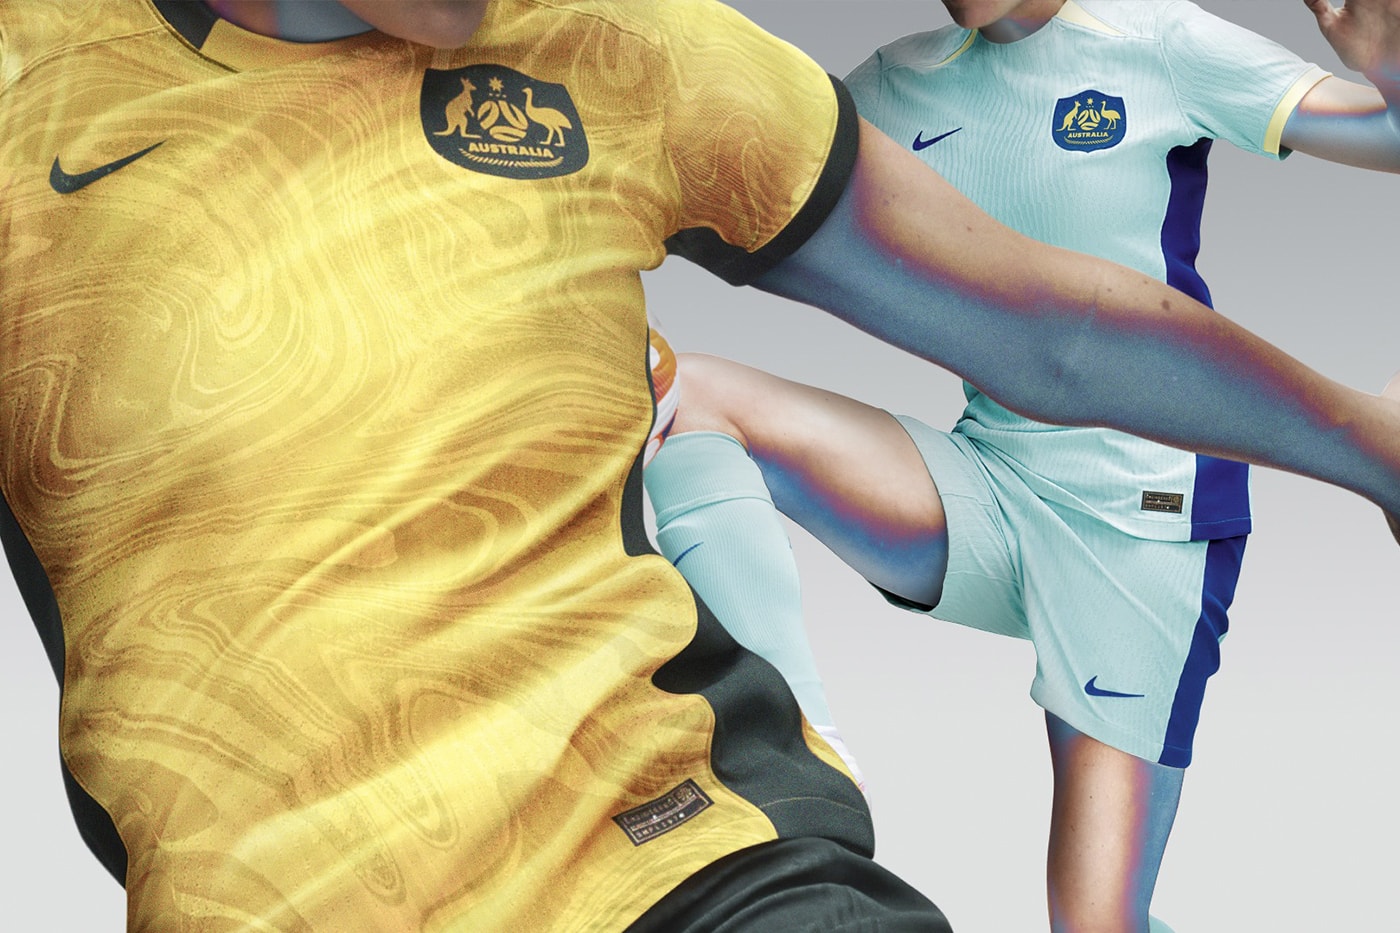 Nike Introduces 2023 Football Kits and Collections women's football national team collections brazil canada usa united kingdom britain lions lionesses portugal women soccer team netherlands australia china france korea new zeland nigeria norway 